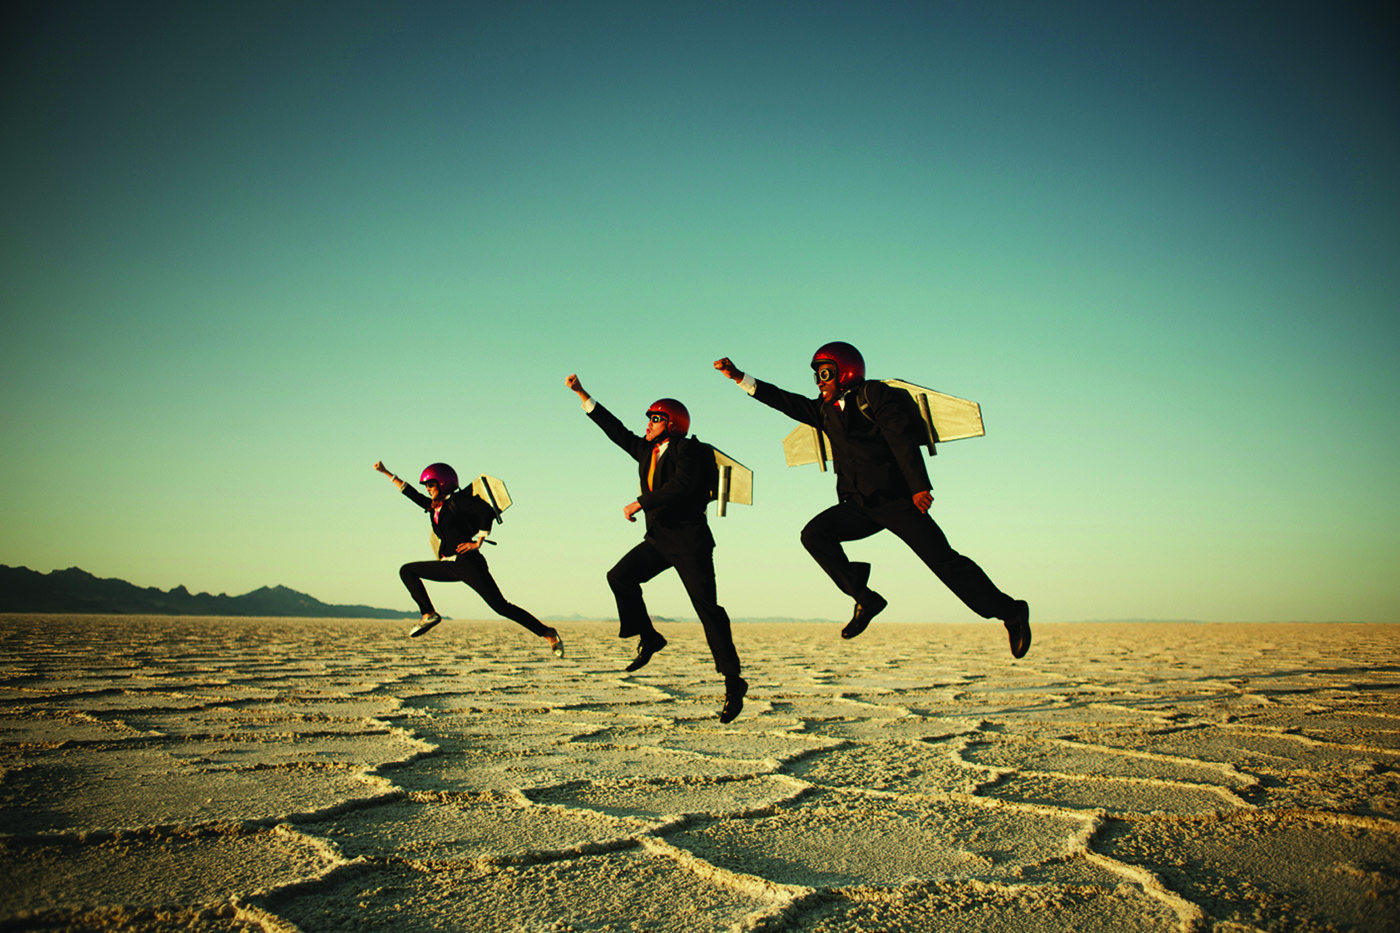 Individuals are seen joyfully leaping across a cracked desert surface under a vast sky at what appears to be either sunrise or sunset.